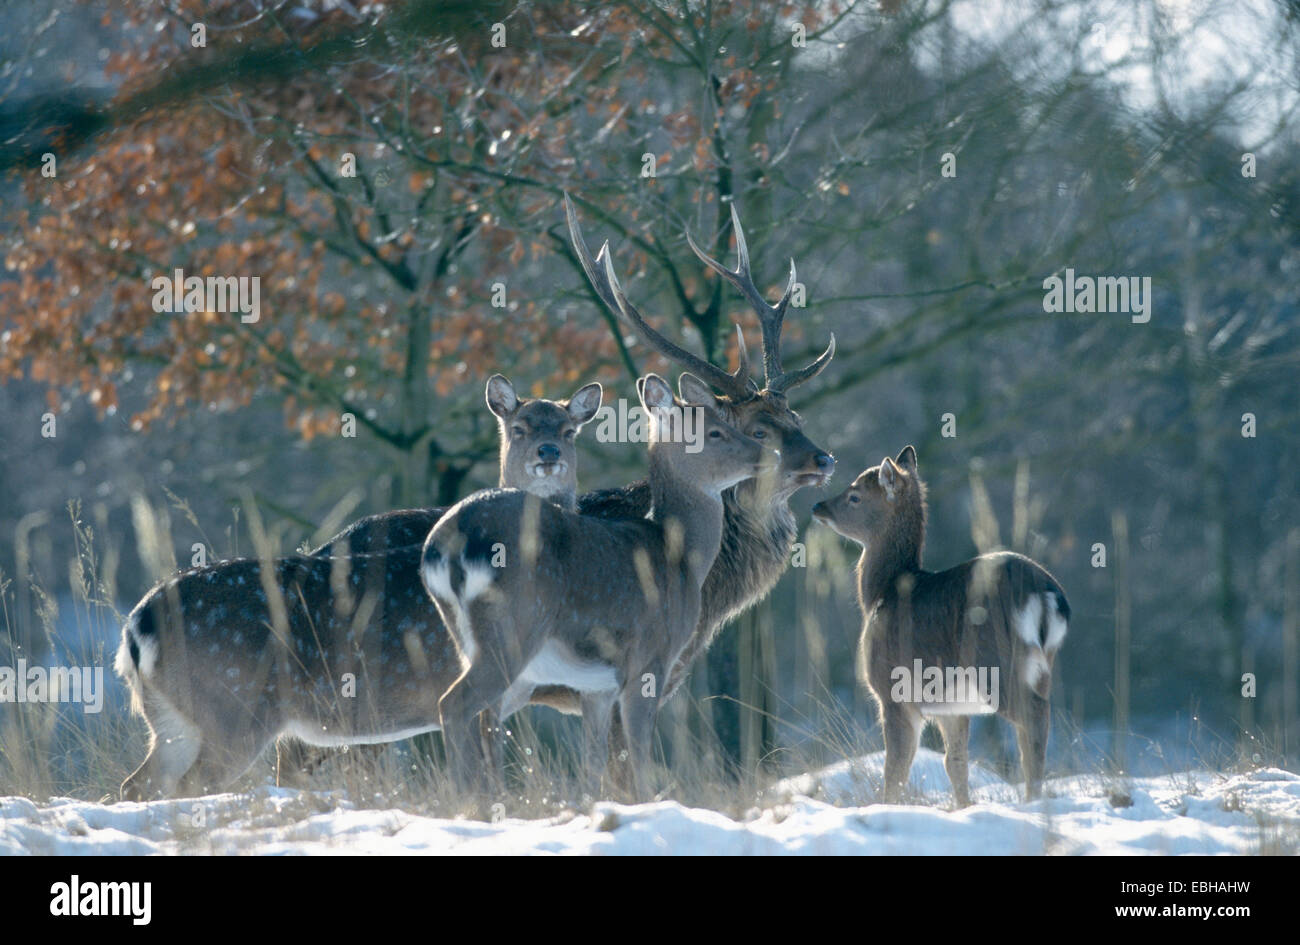 sika deer, Dybowski-sika (Cervus nippon dybowskii), stags and hinds in winter, Jan 99. Stock Photo